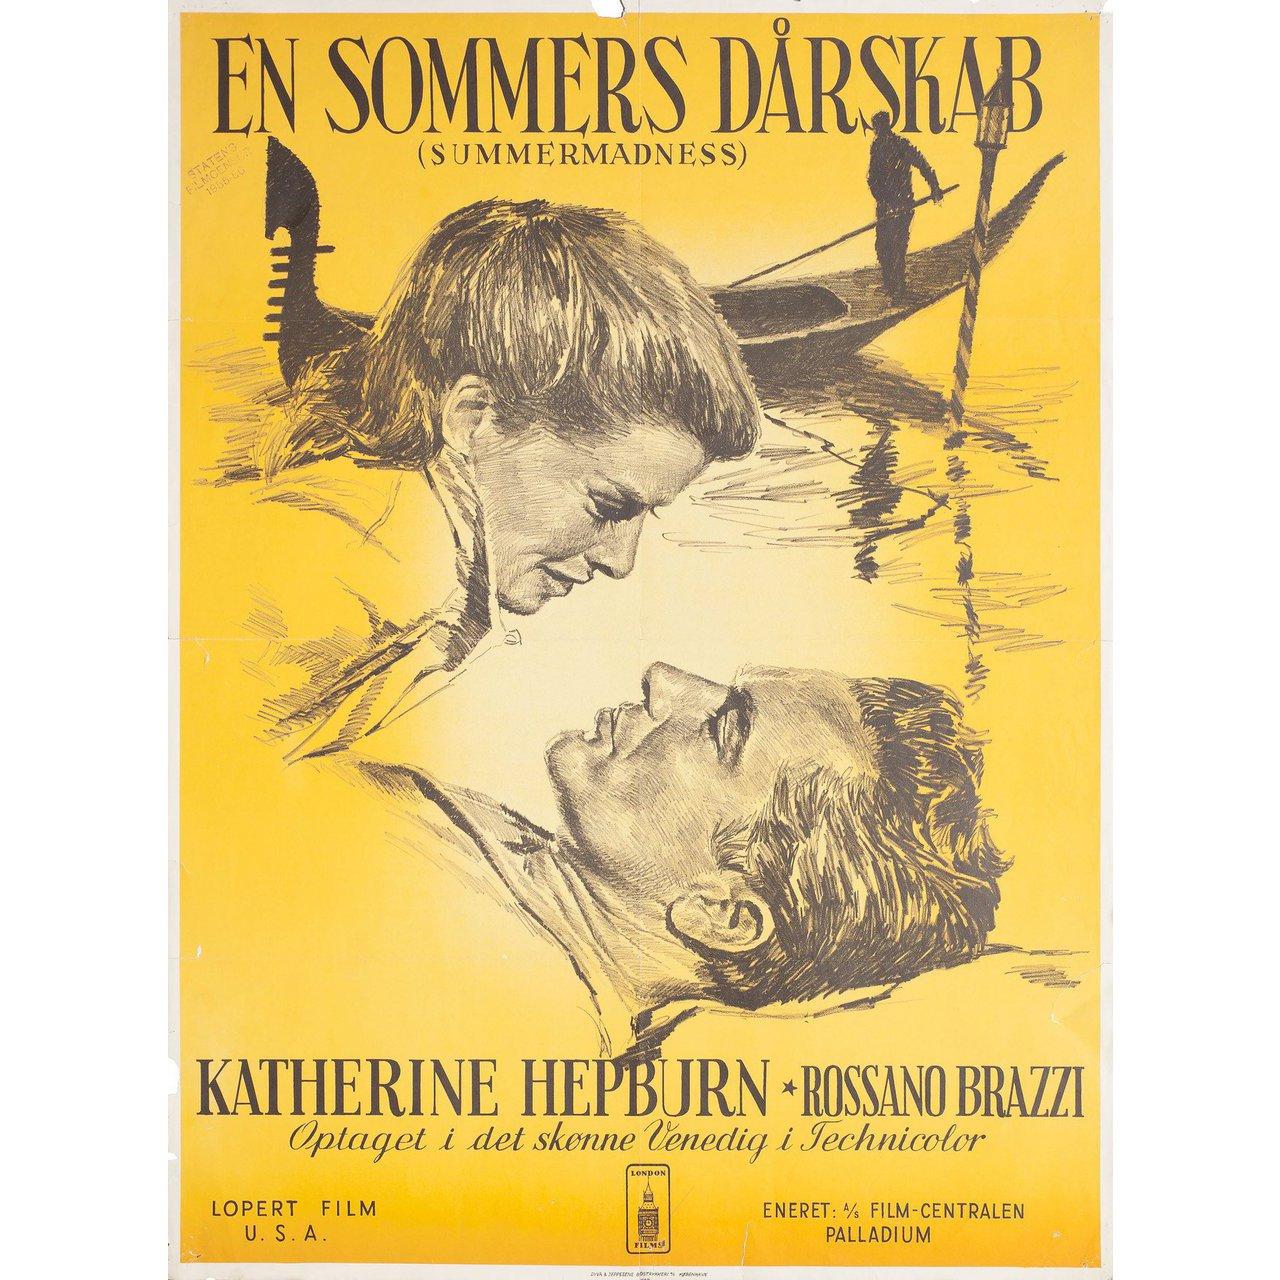 Original 1956 Danish A1 poster for the film “Summertime” directed by David Lean with Katharine Hepburn / Rossano Brazzi / Isa Miranda / Darren McGavin. Good- very good condition, folded with edge tears & small piece missing in top border. Many